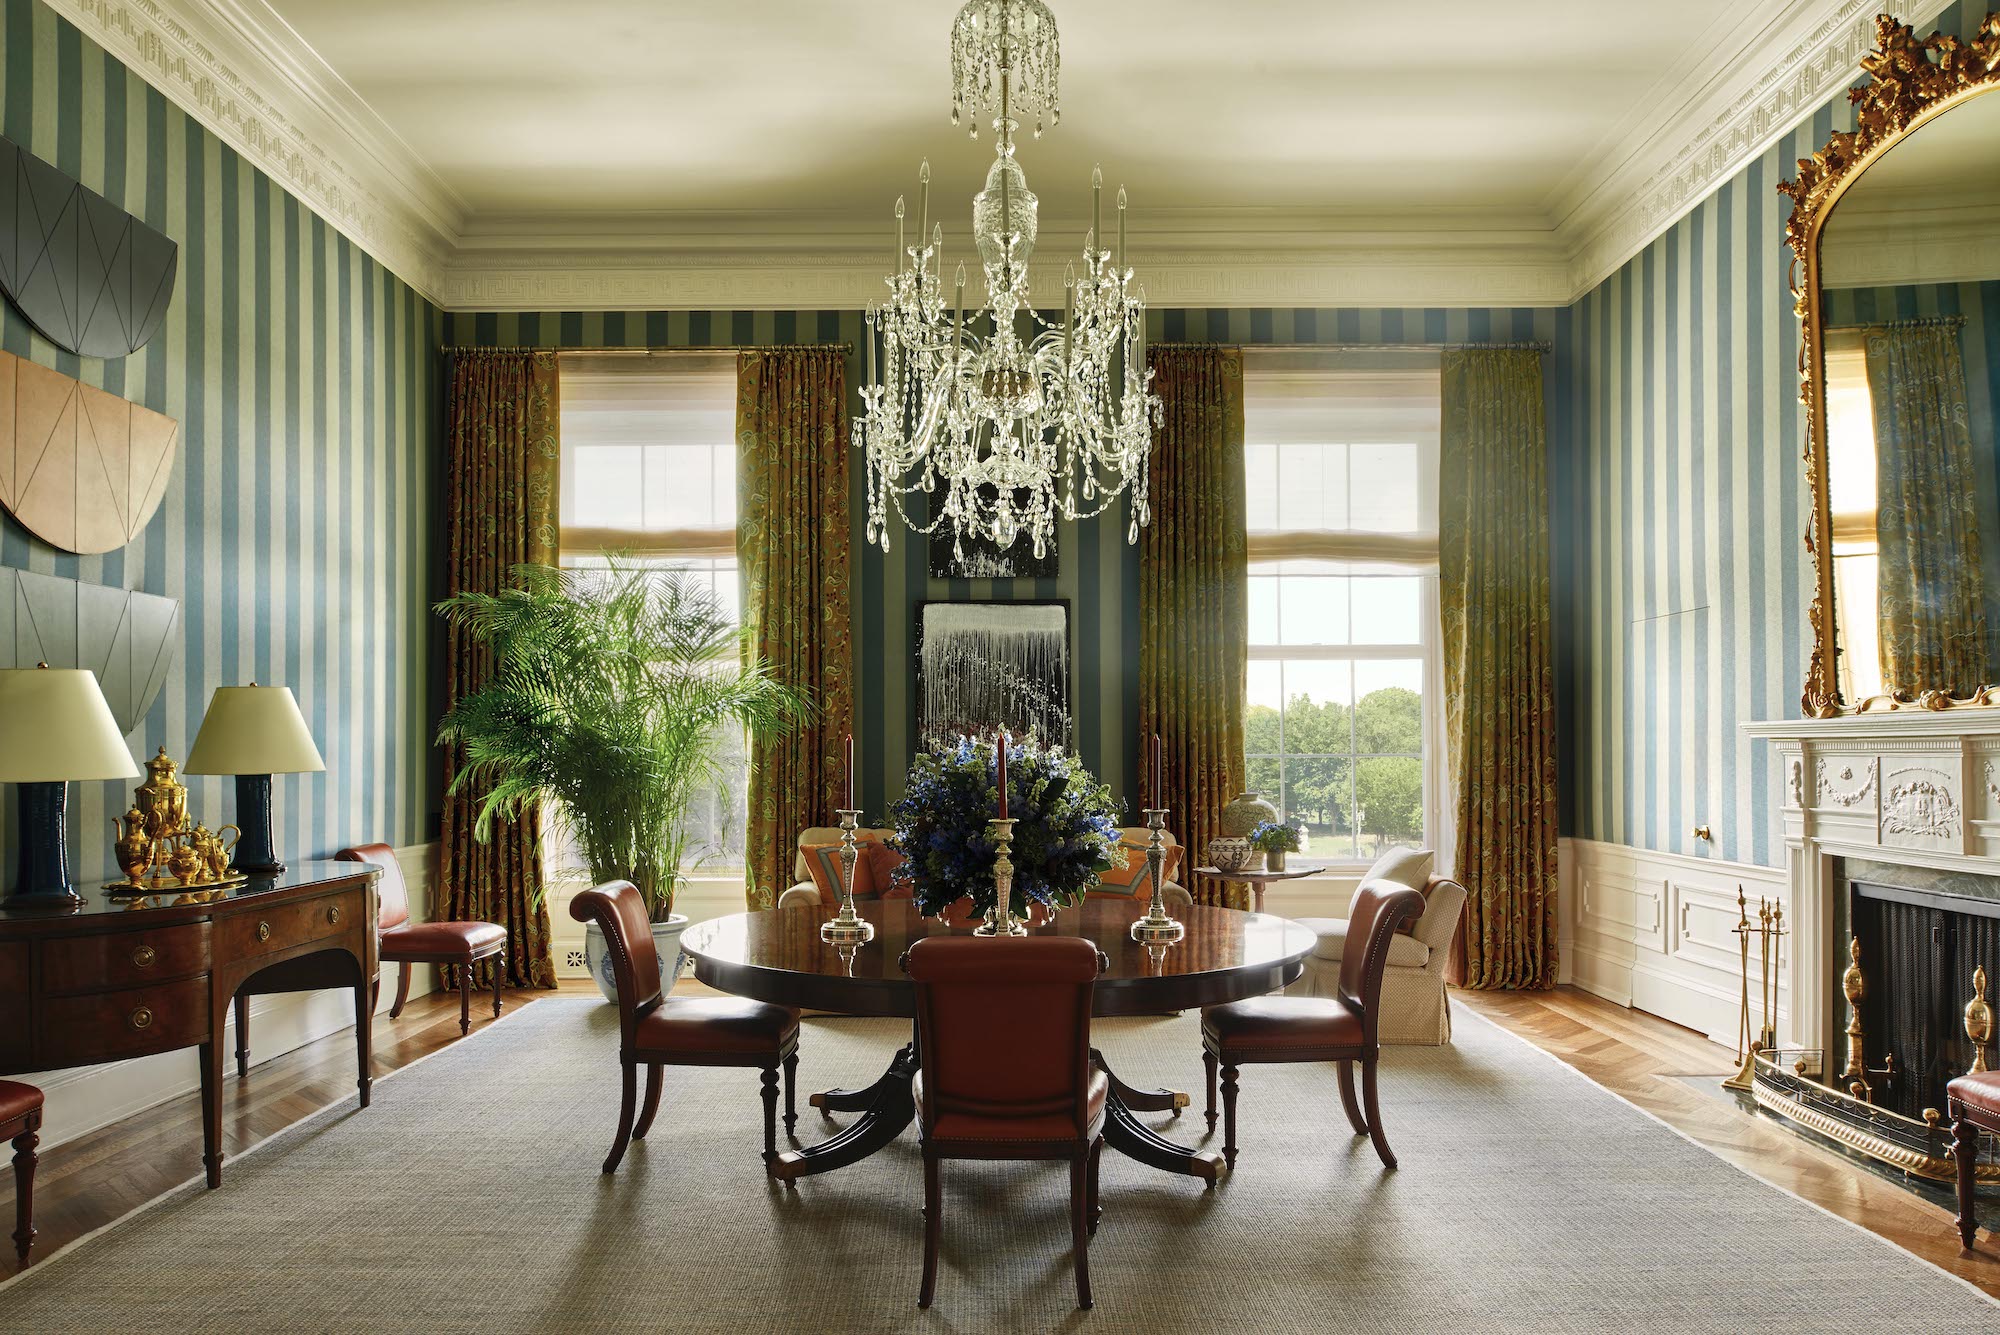 Private dining room at the White House, photographed for Barack Obama by Michael Mundy